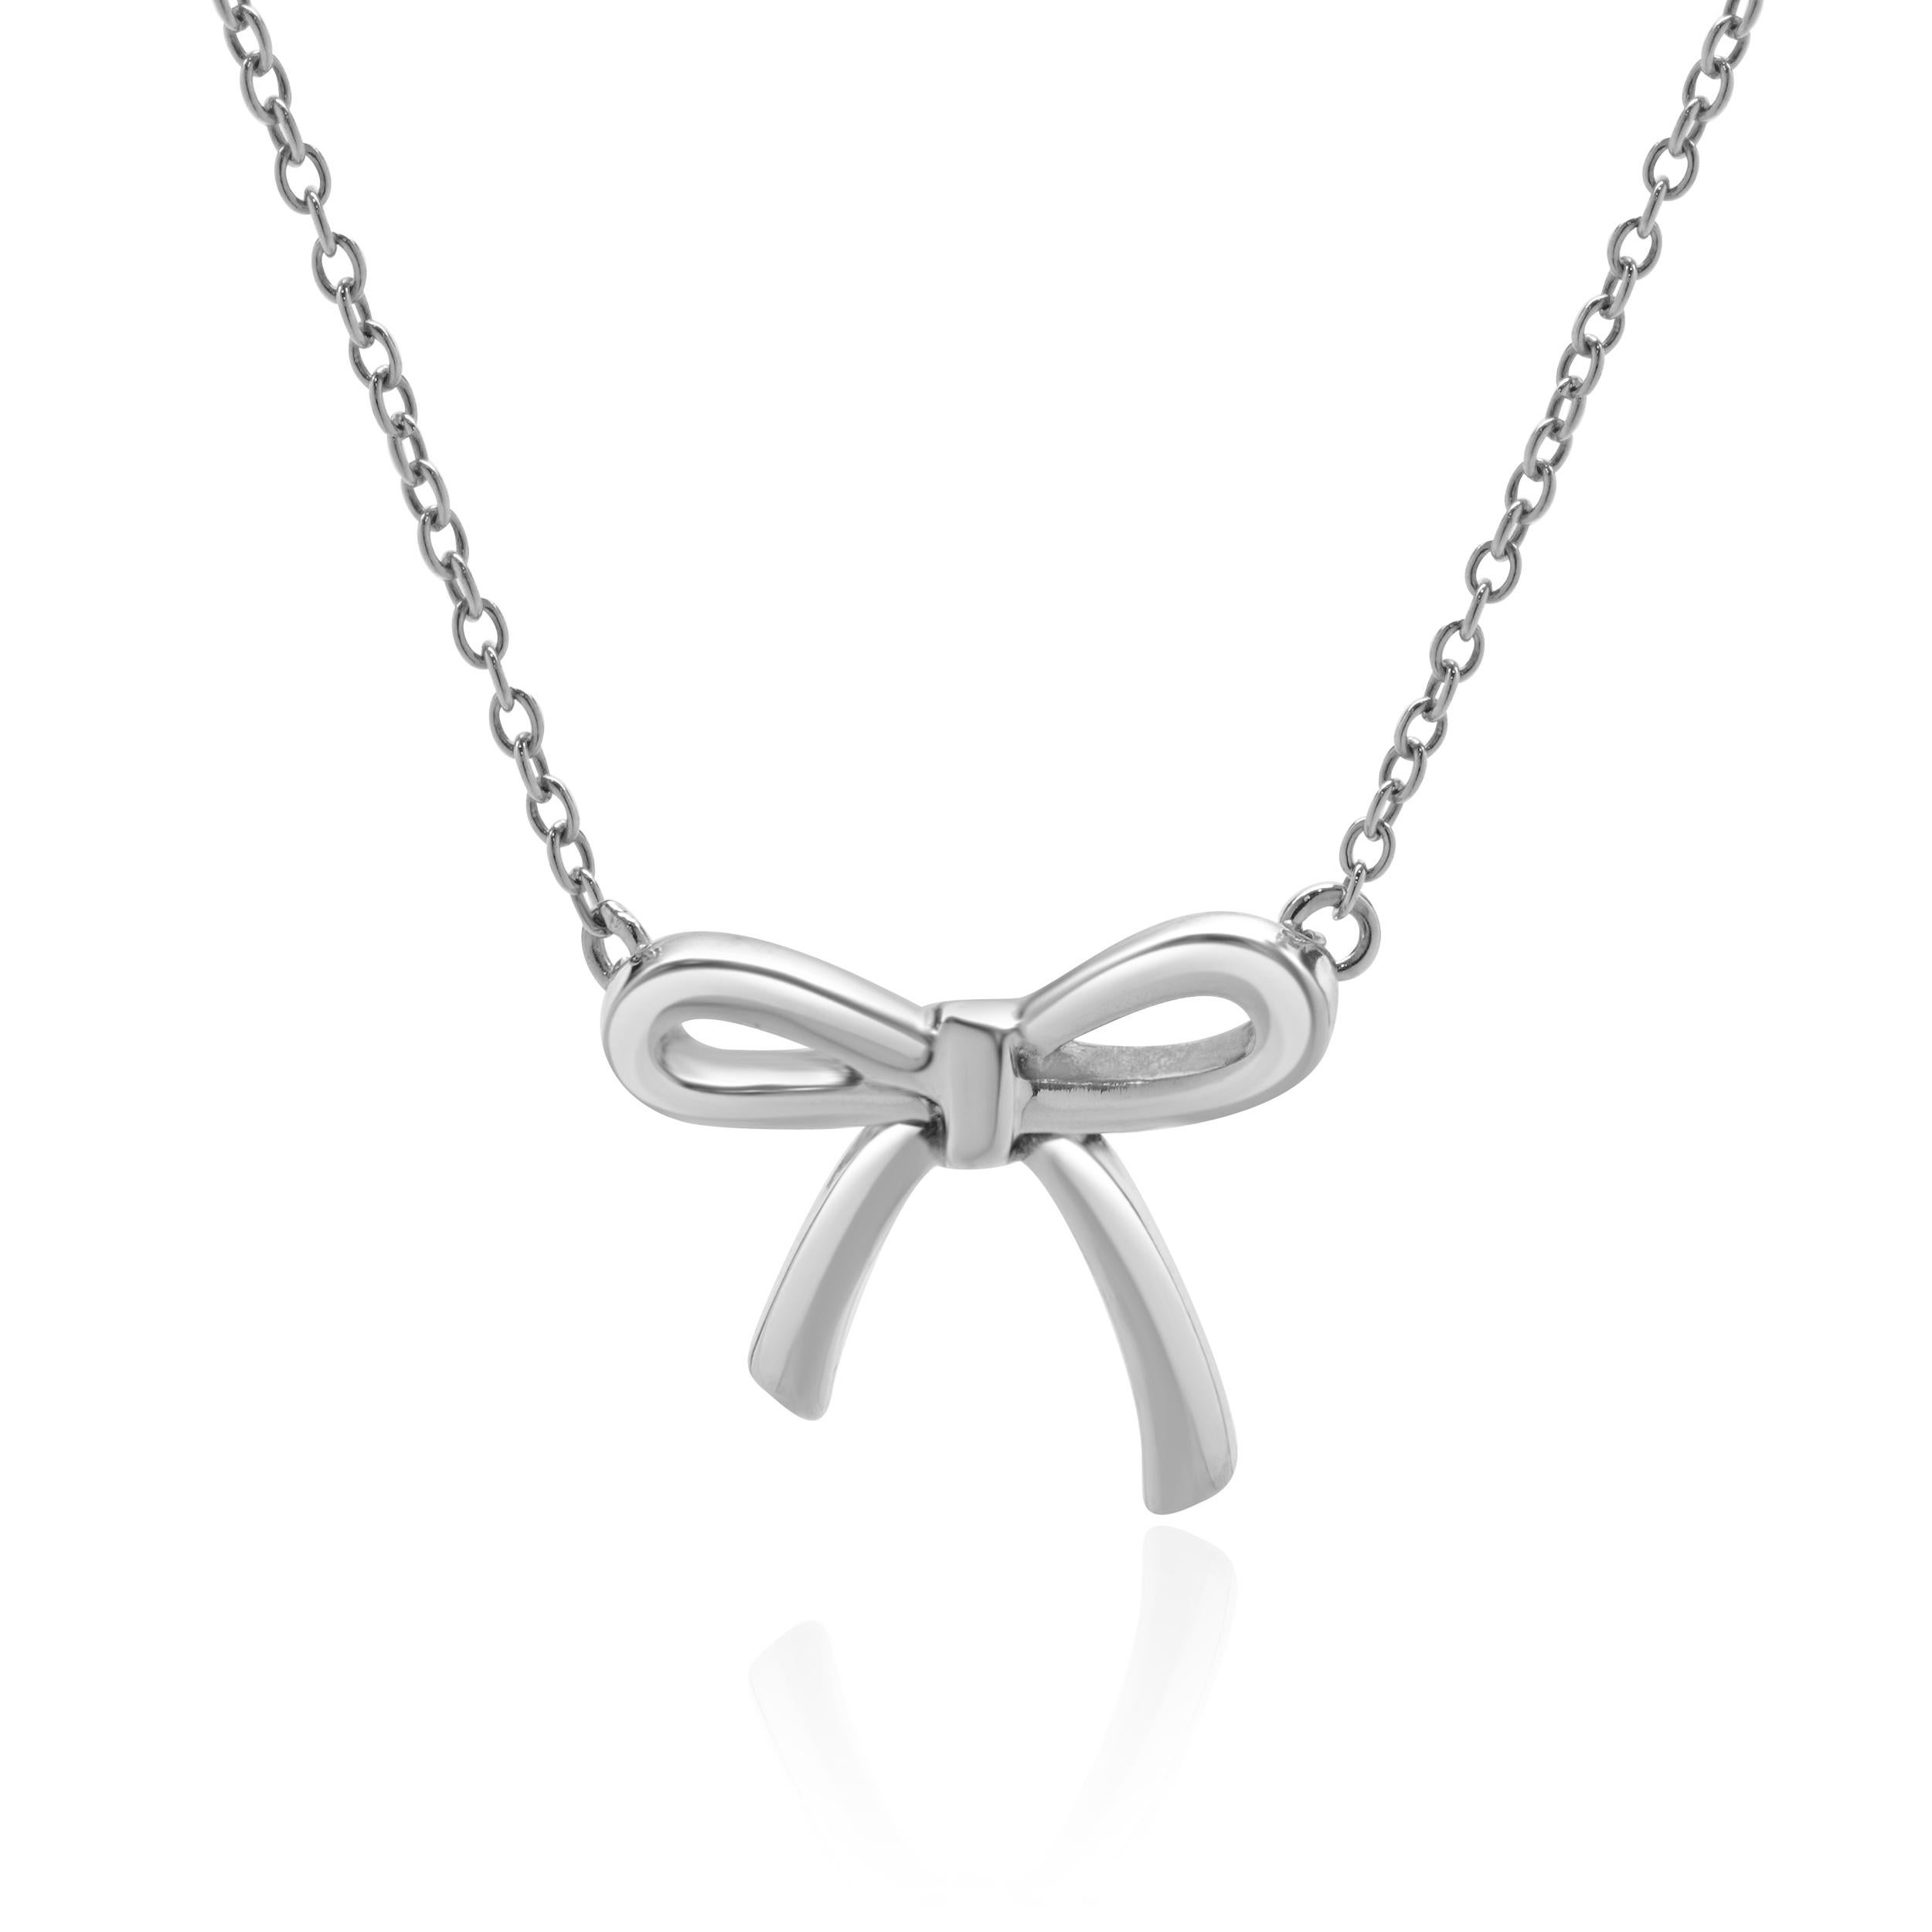 Designer: Tiffany & Co. 
Material: sterling silver
Dimensions: necklace measures 16.5-inches
Weight: 2.01 grams
